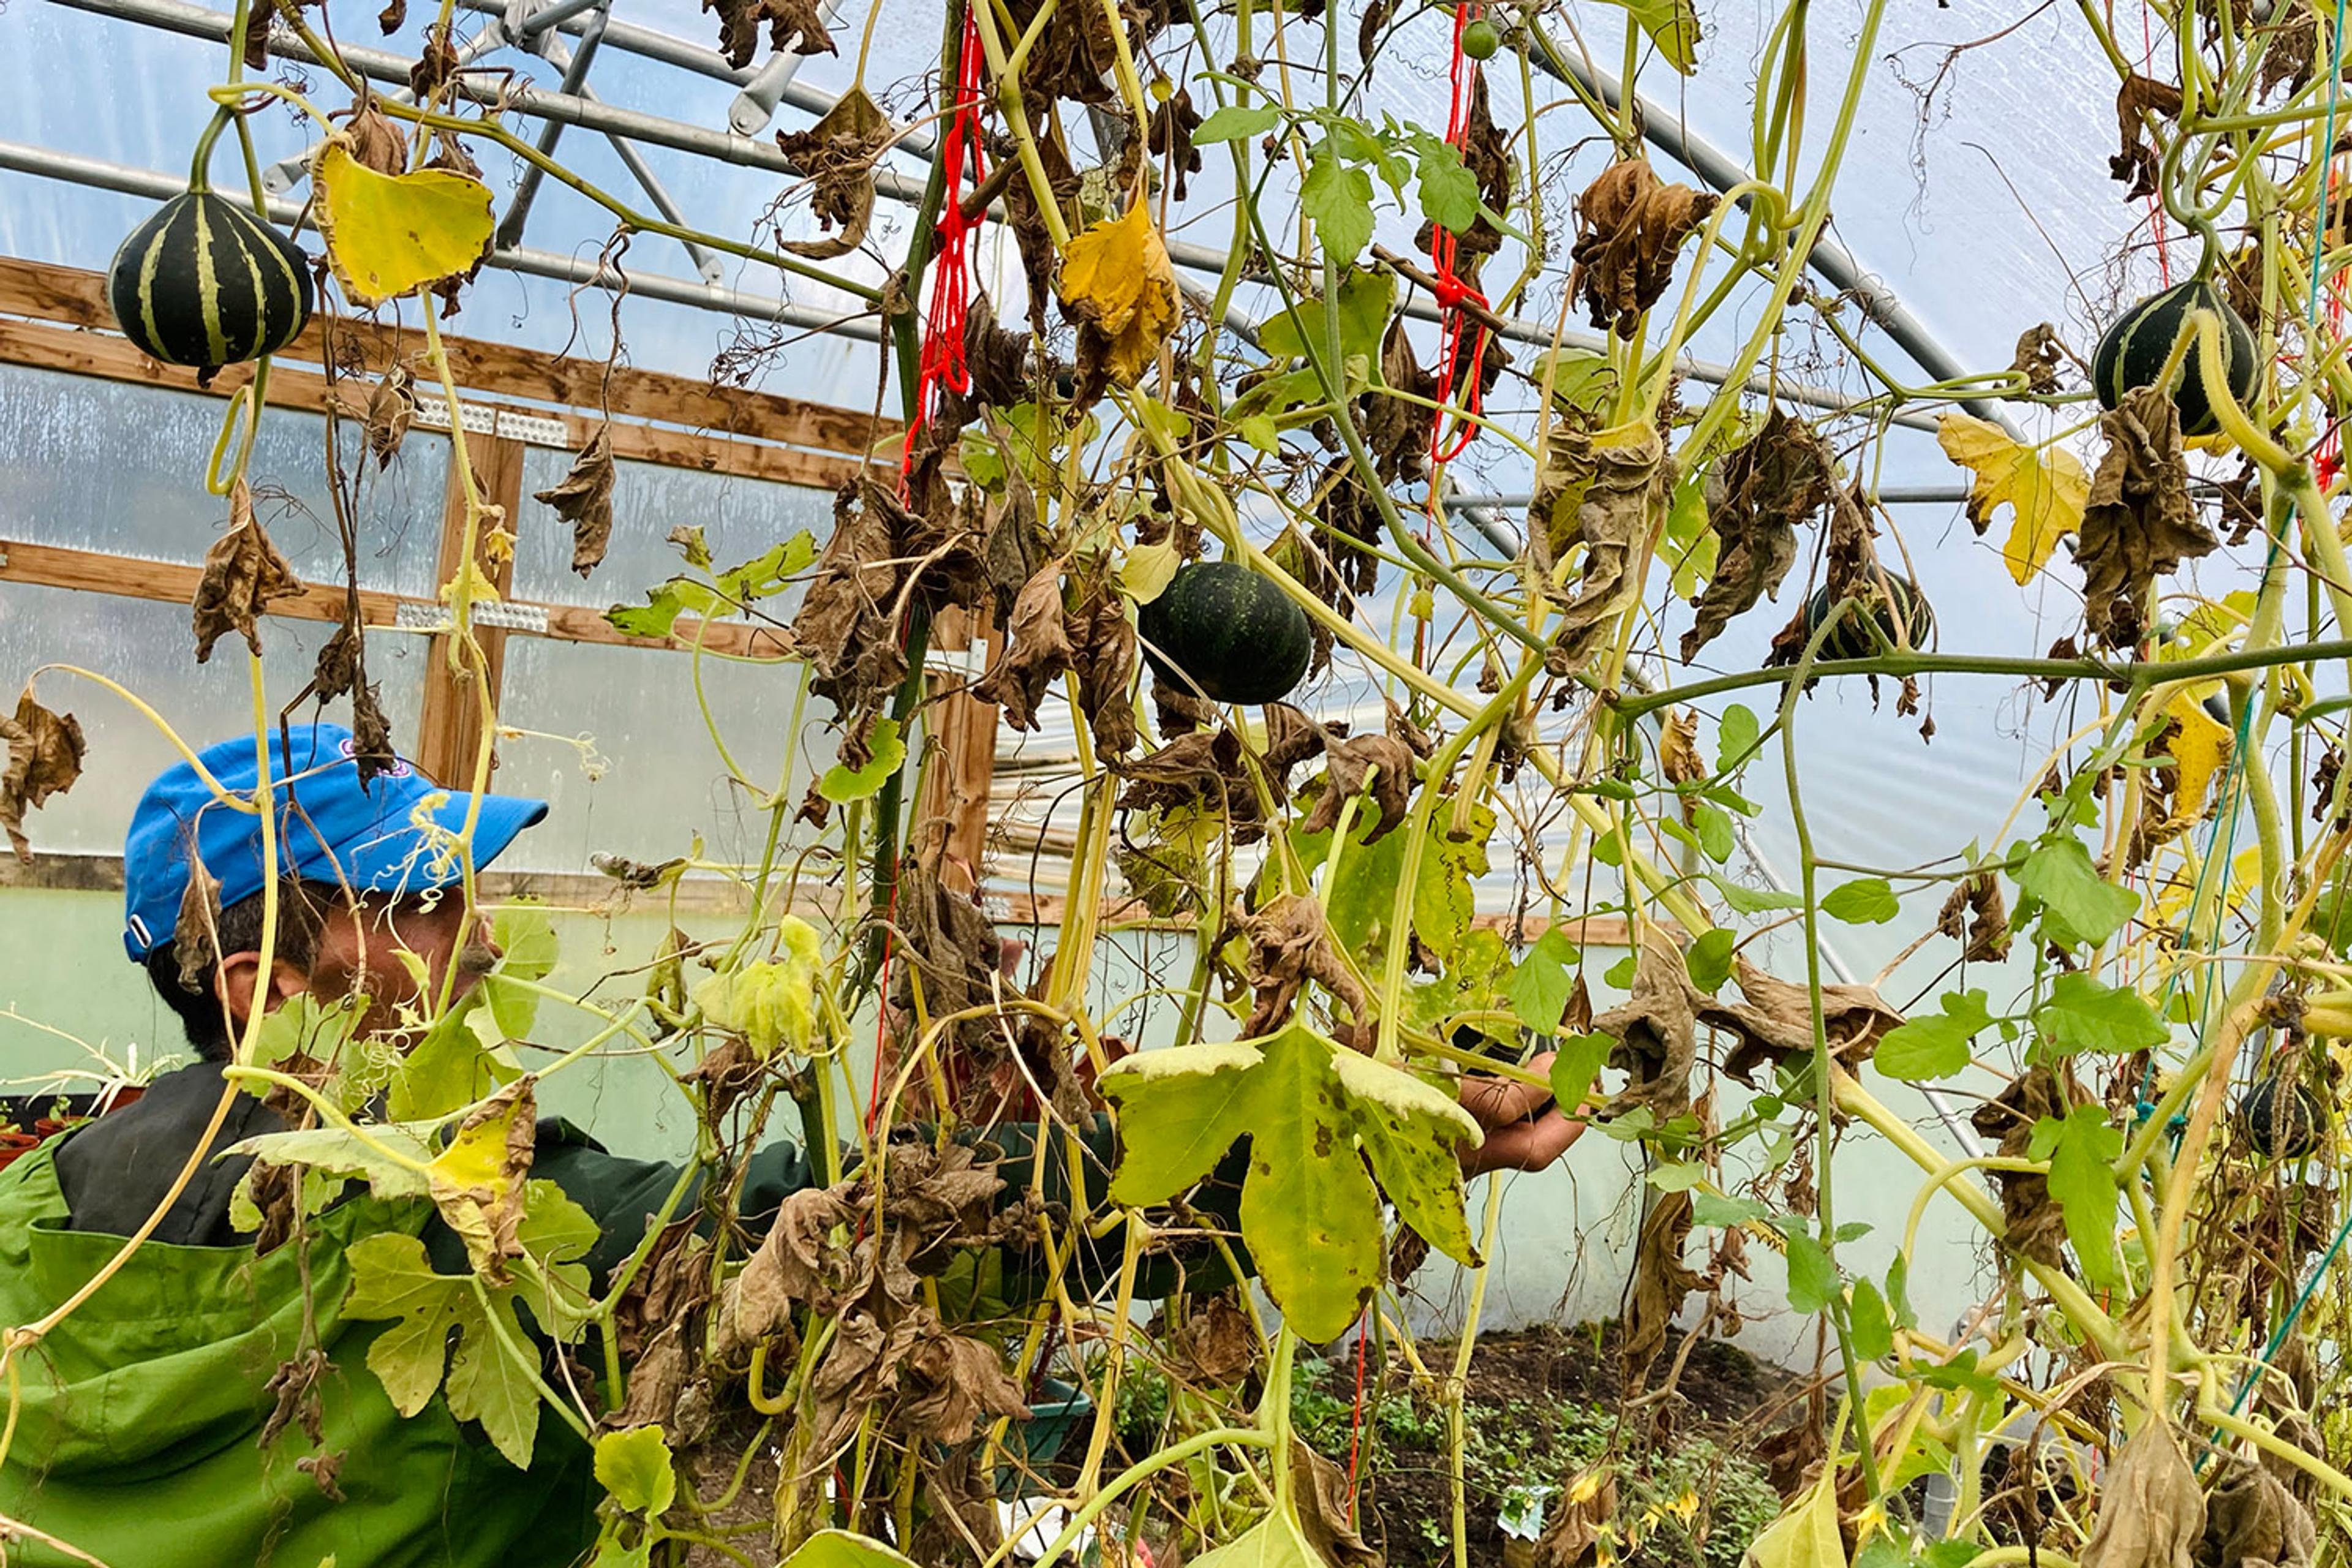 Reza looks at squash hanging from a polytunnel at The Comfrey Project.